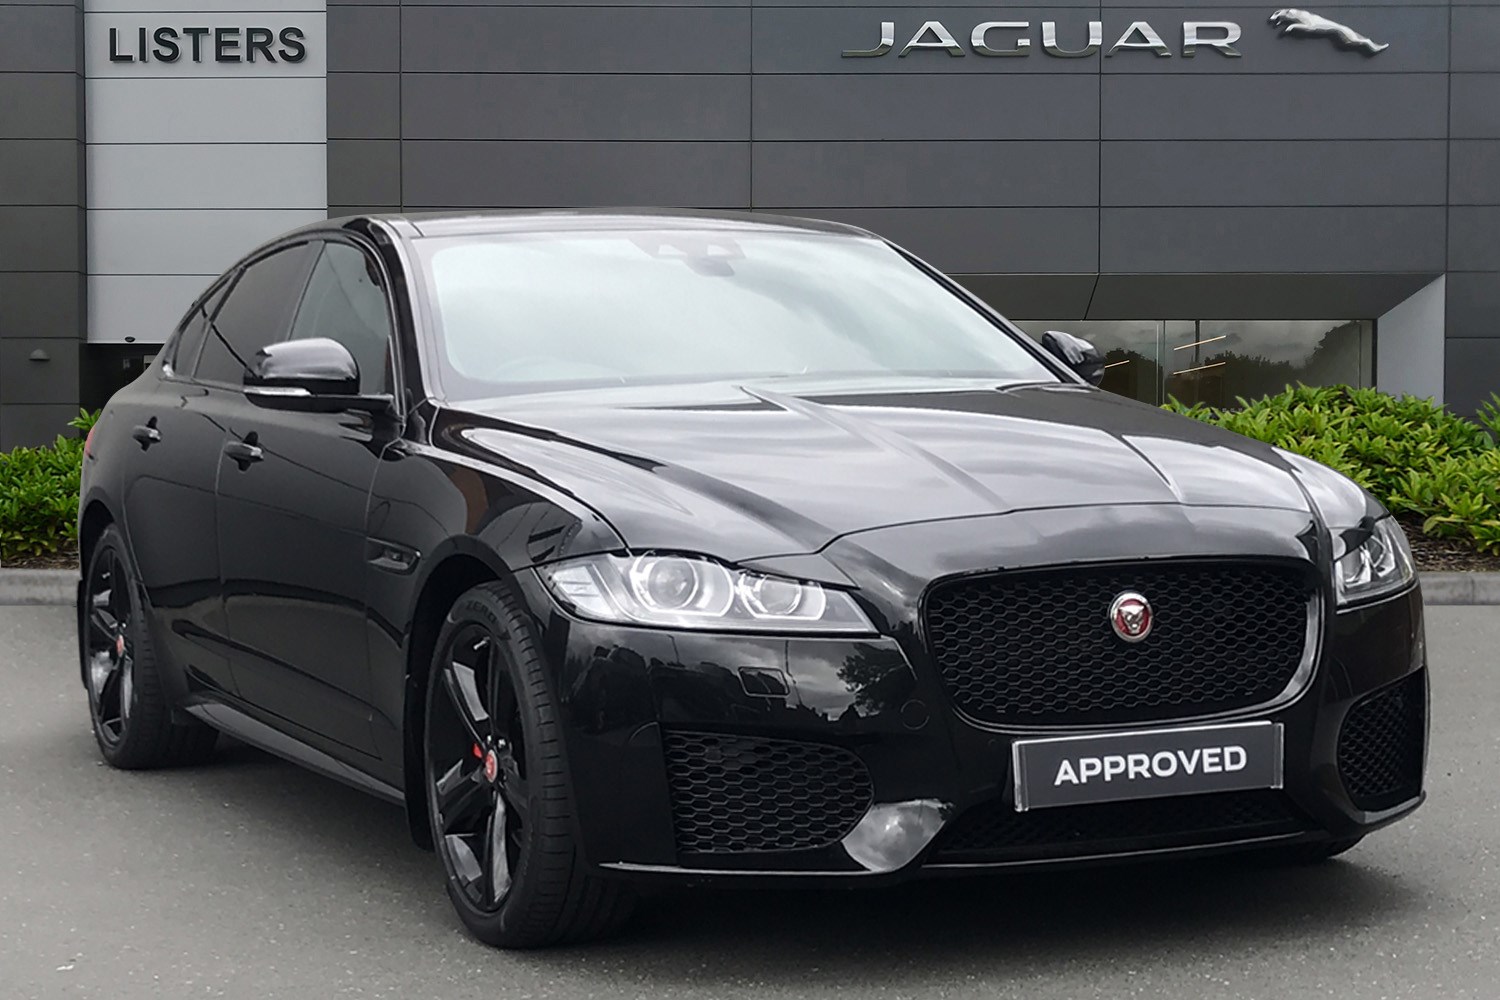 2020 used Jaguar XF 2.0d (180) Chequered Flag 4dr Auto